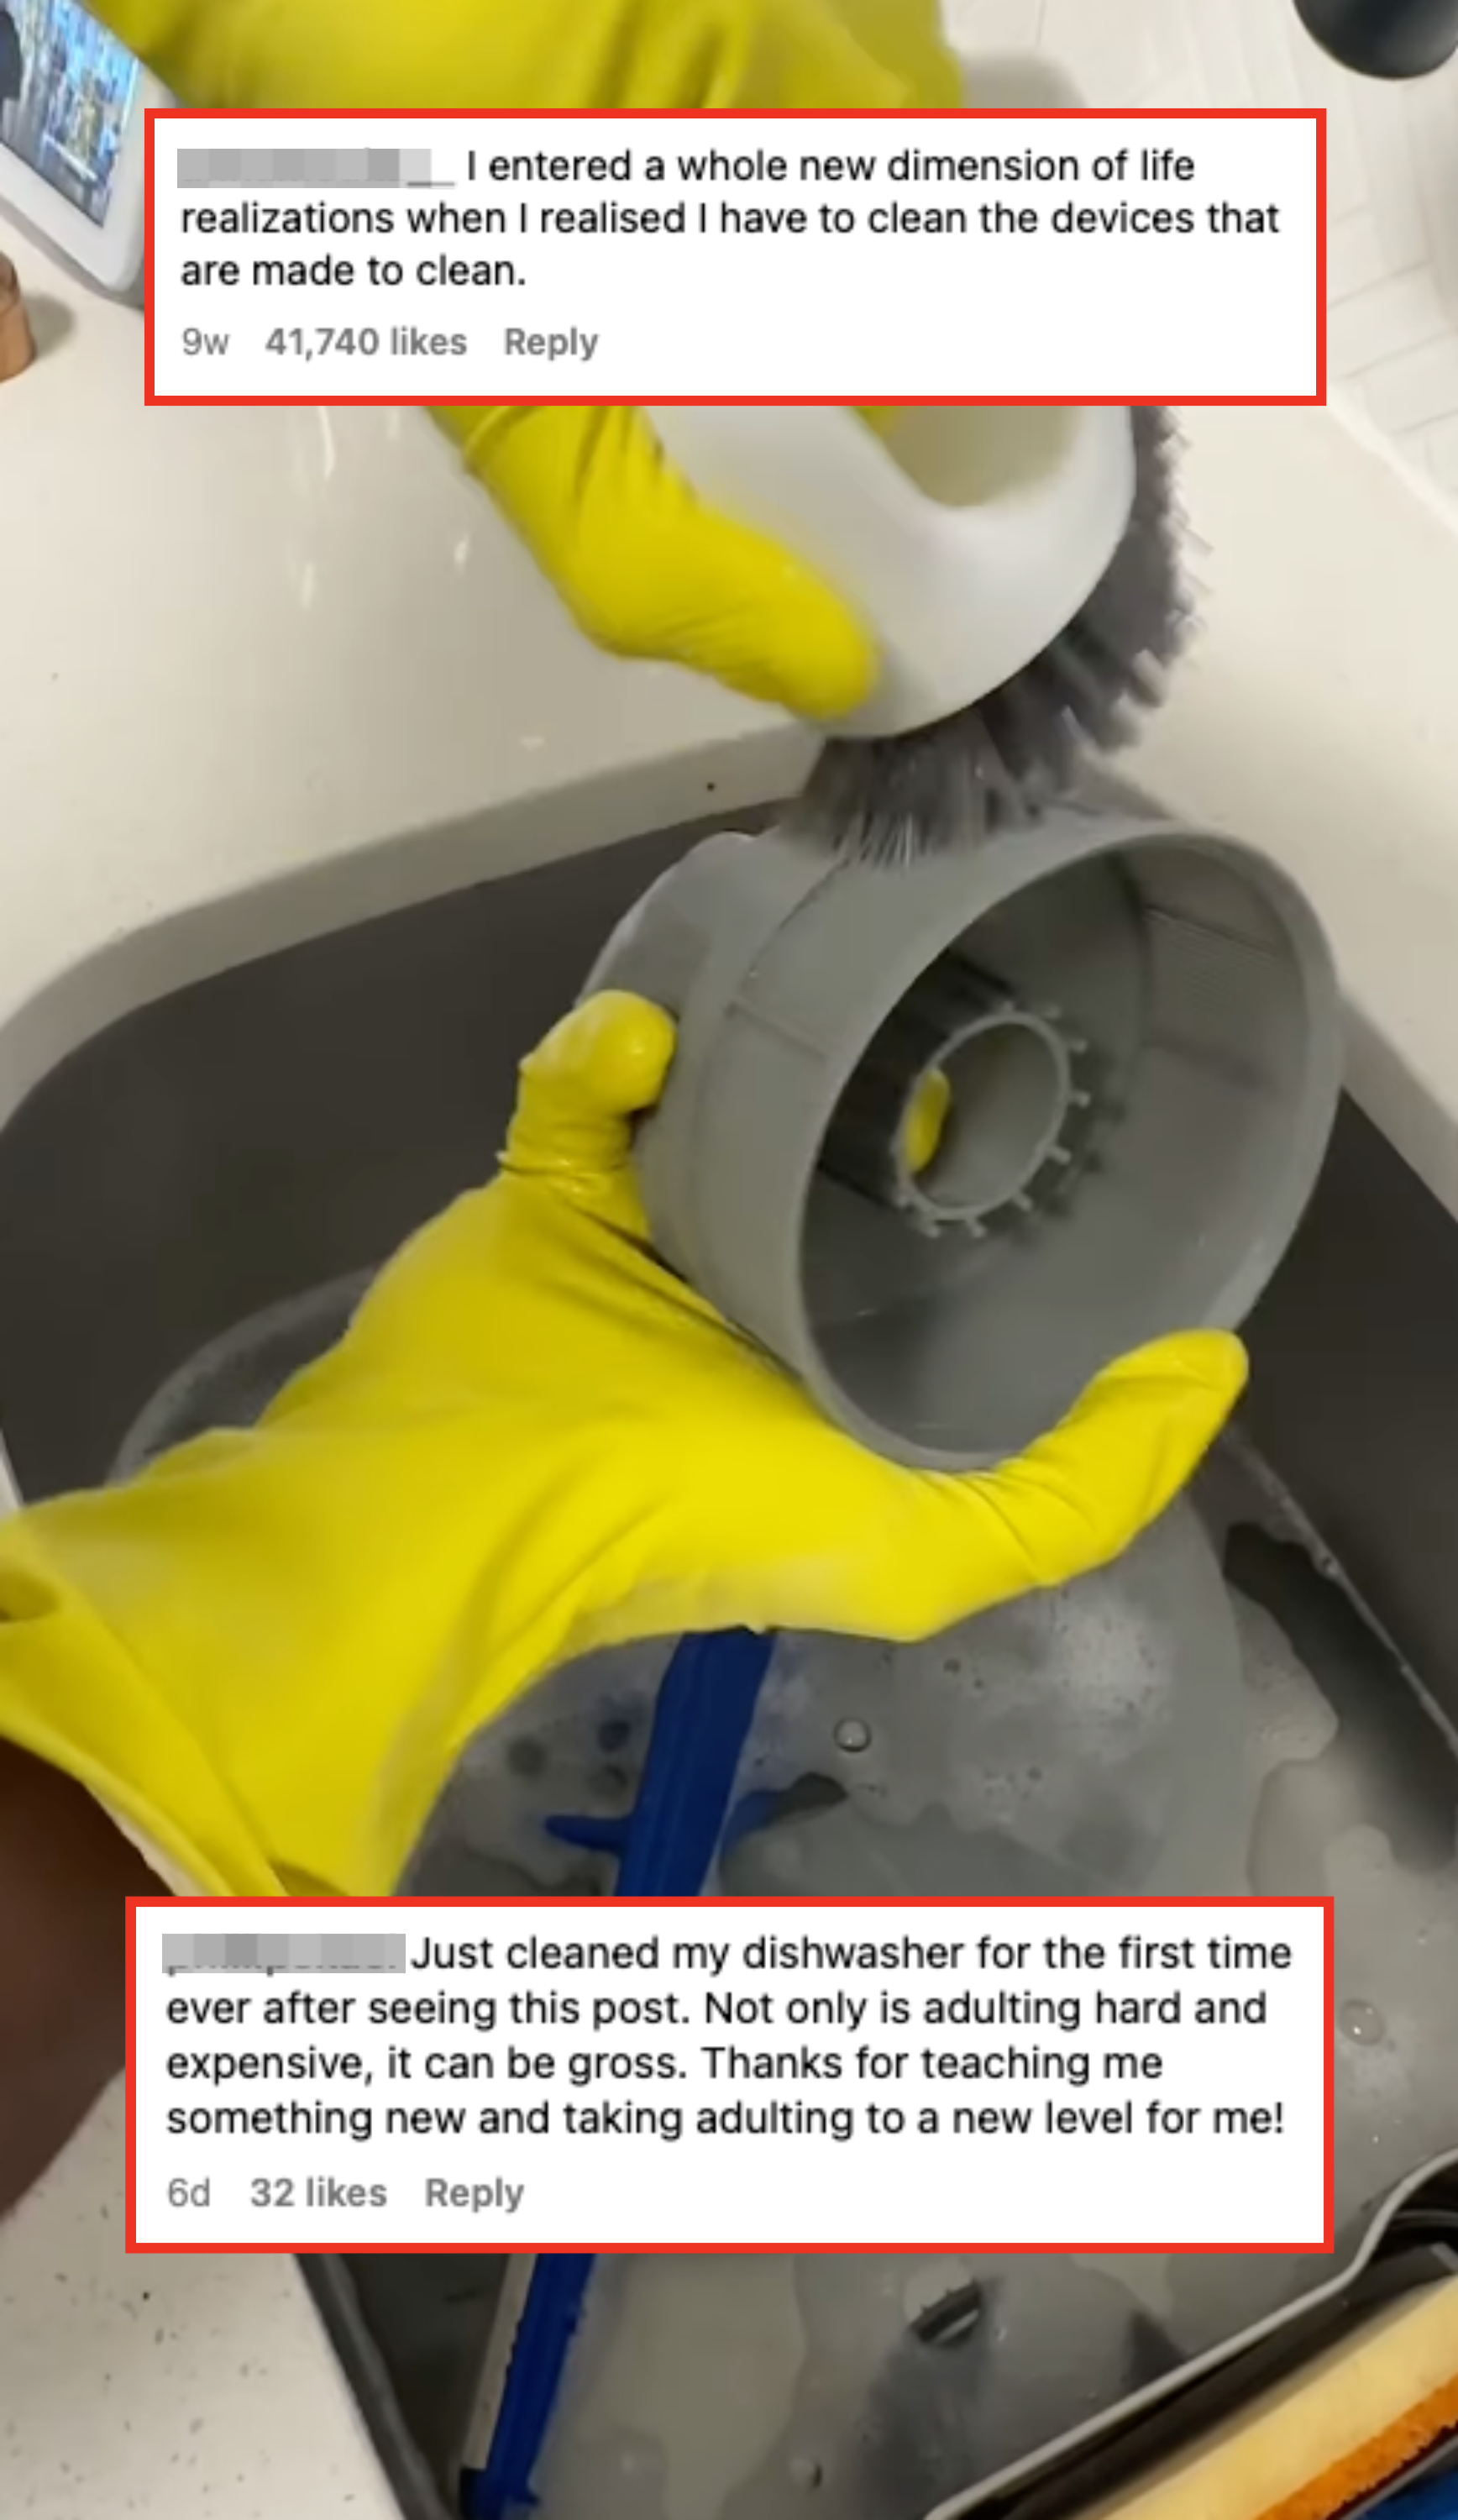 Hands in gloves scrubbing a sink strainer with a brush over a sink with captions about learning that devices made for cleaning also need to be cleaned and cleaning a dishwasher for the first time